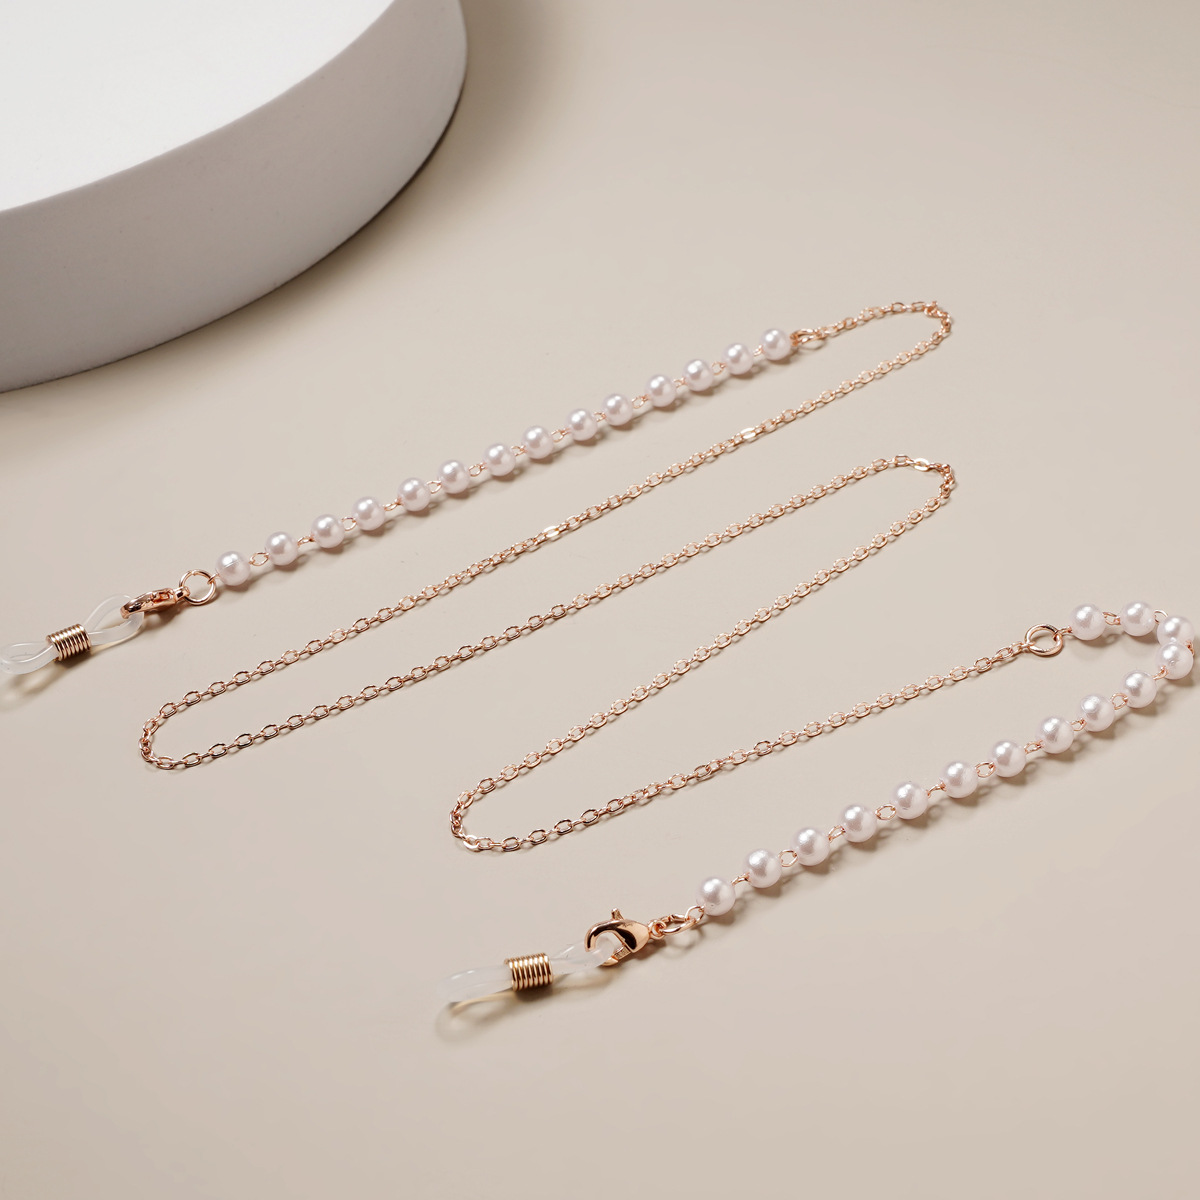 3:Rose gold chain white pearl